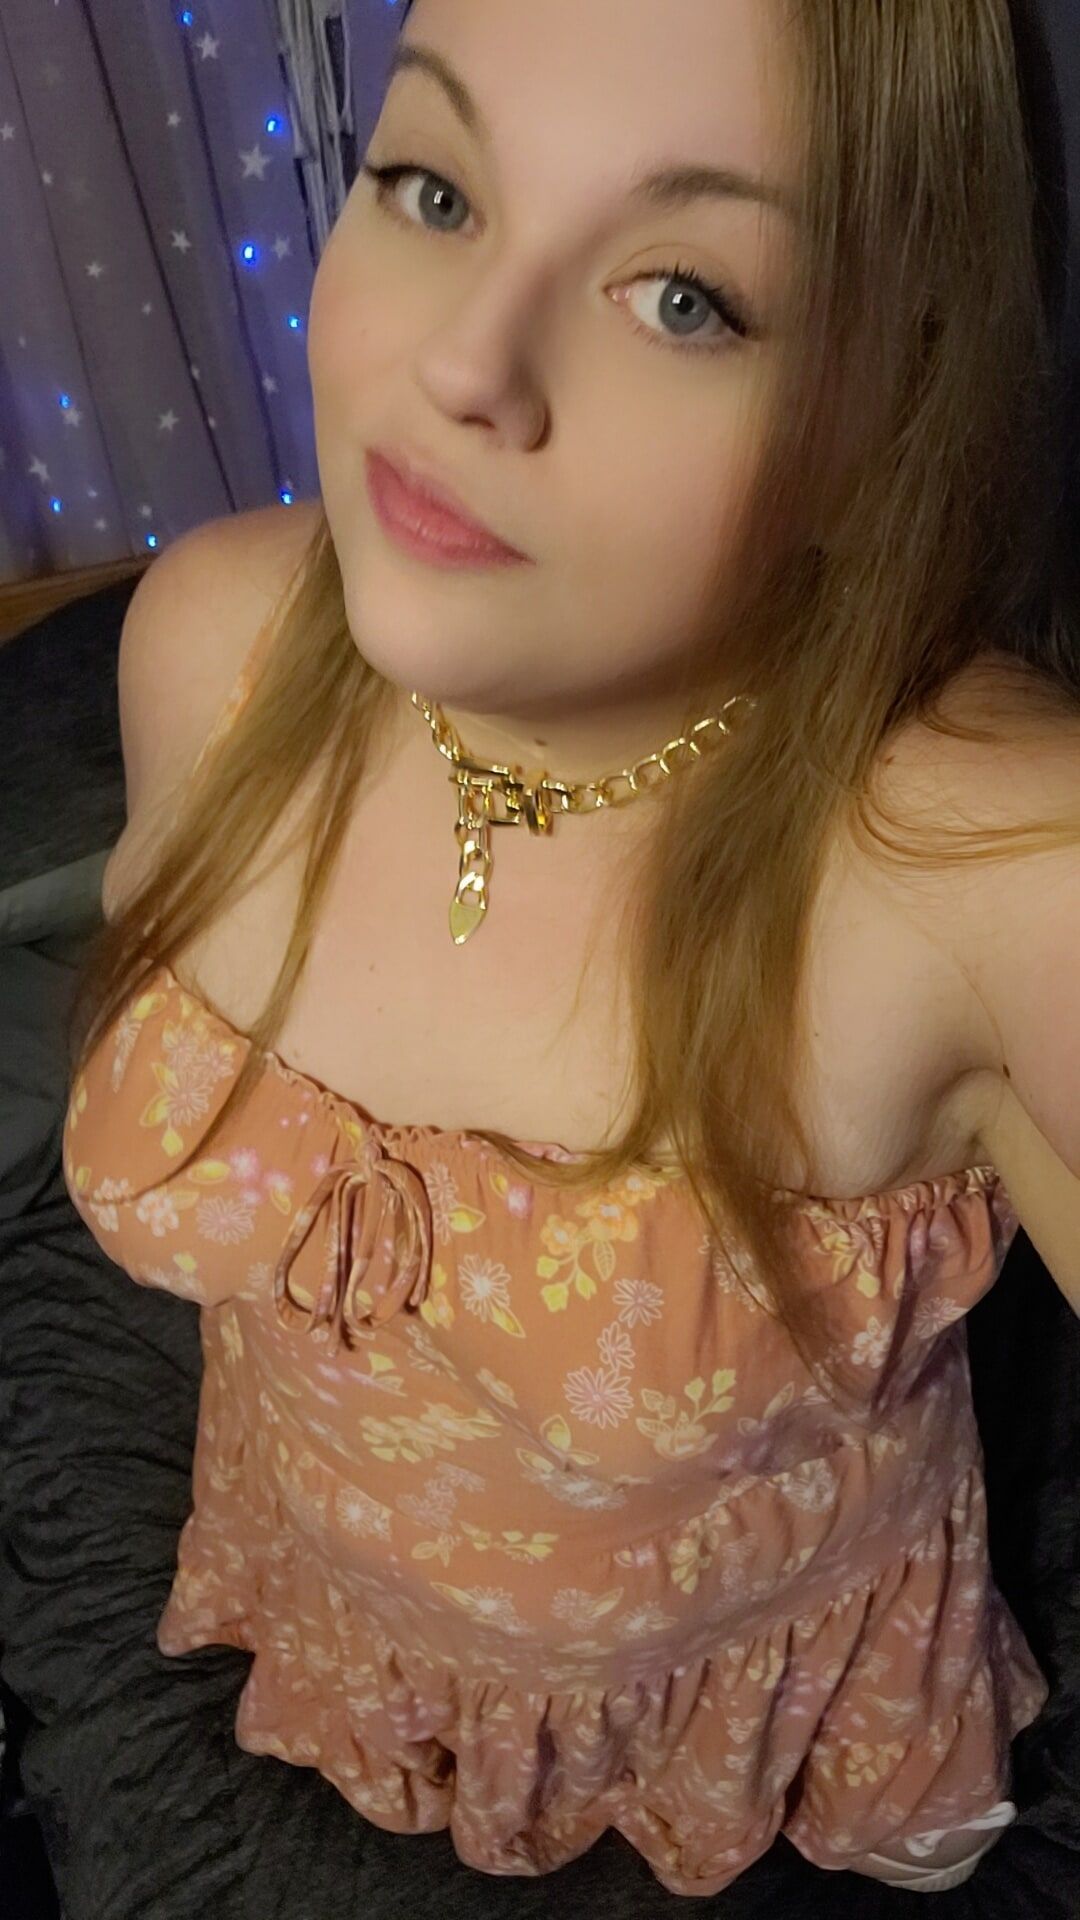 Cute bbw in dress and white fishnet knee highs #4